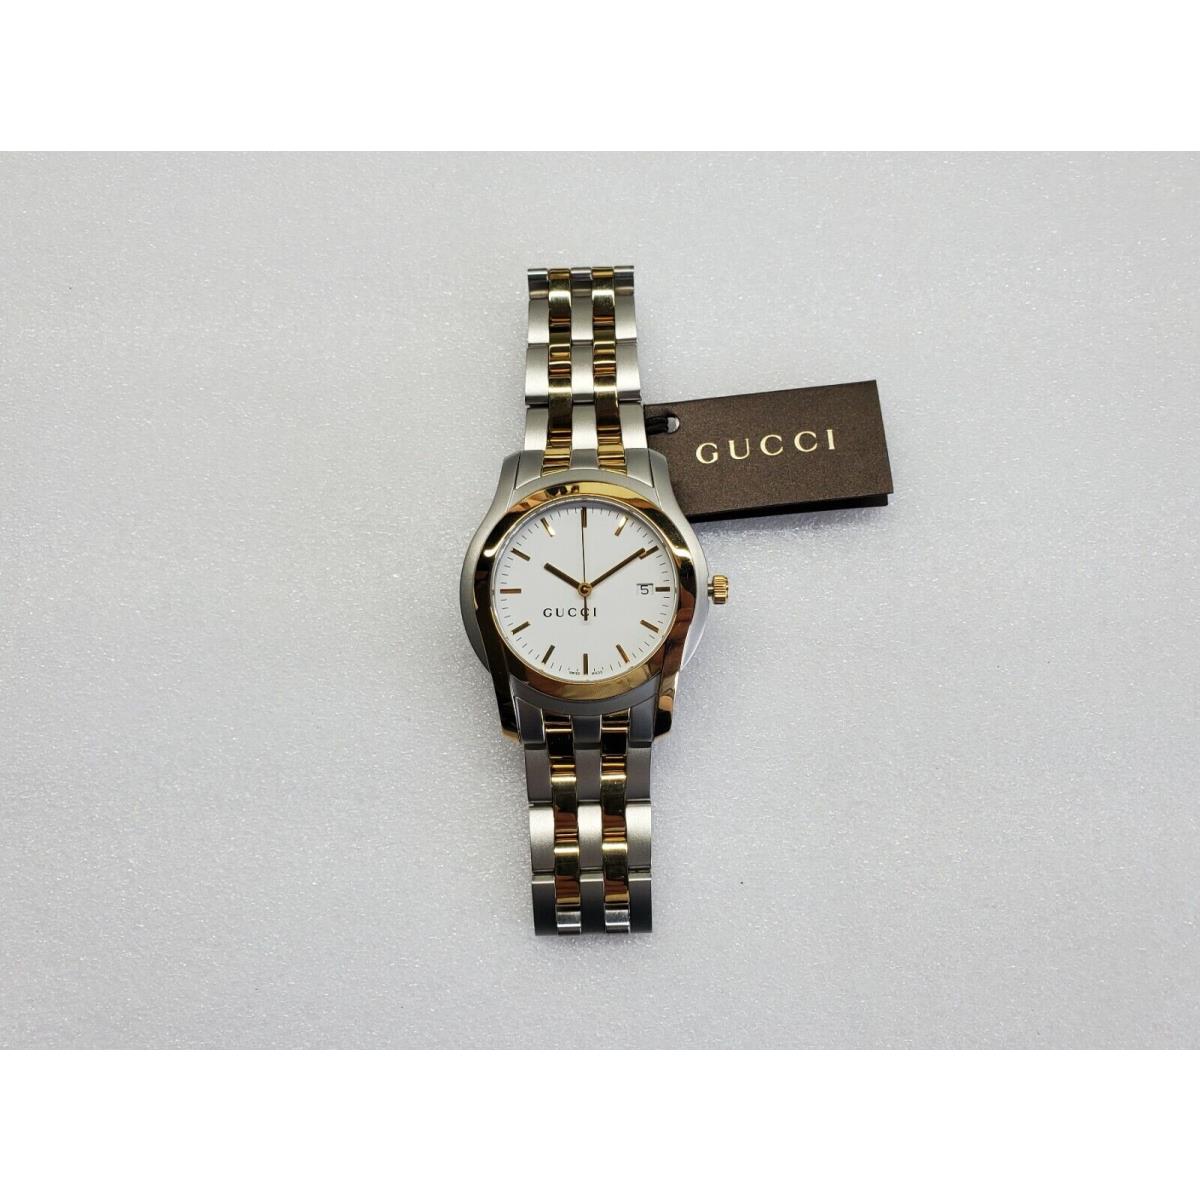 Gucci watch  - White Dial, Silver Band, Gold Bezel